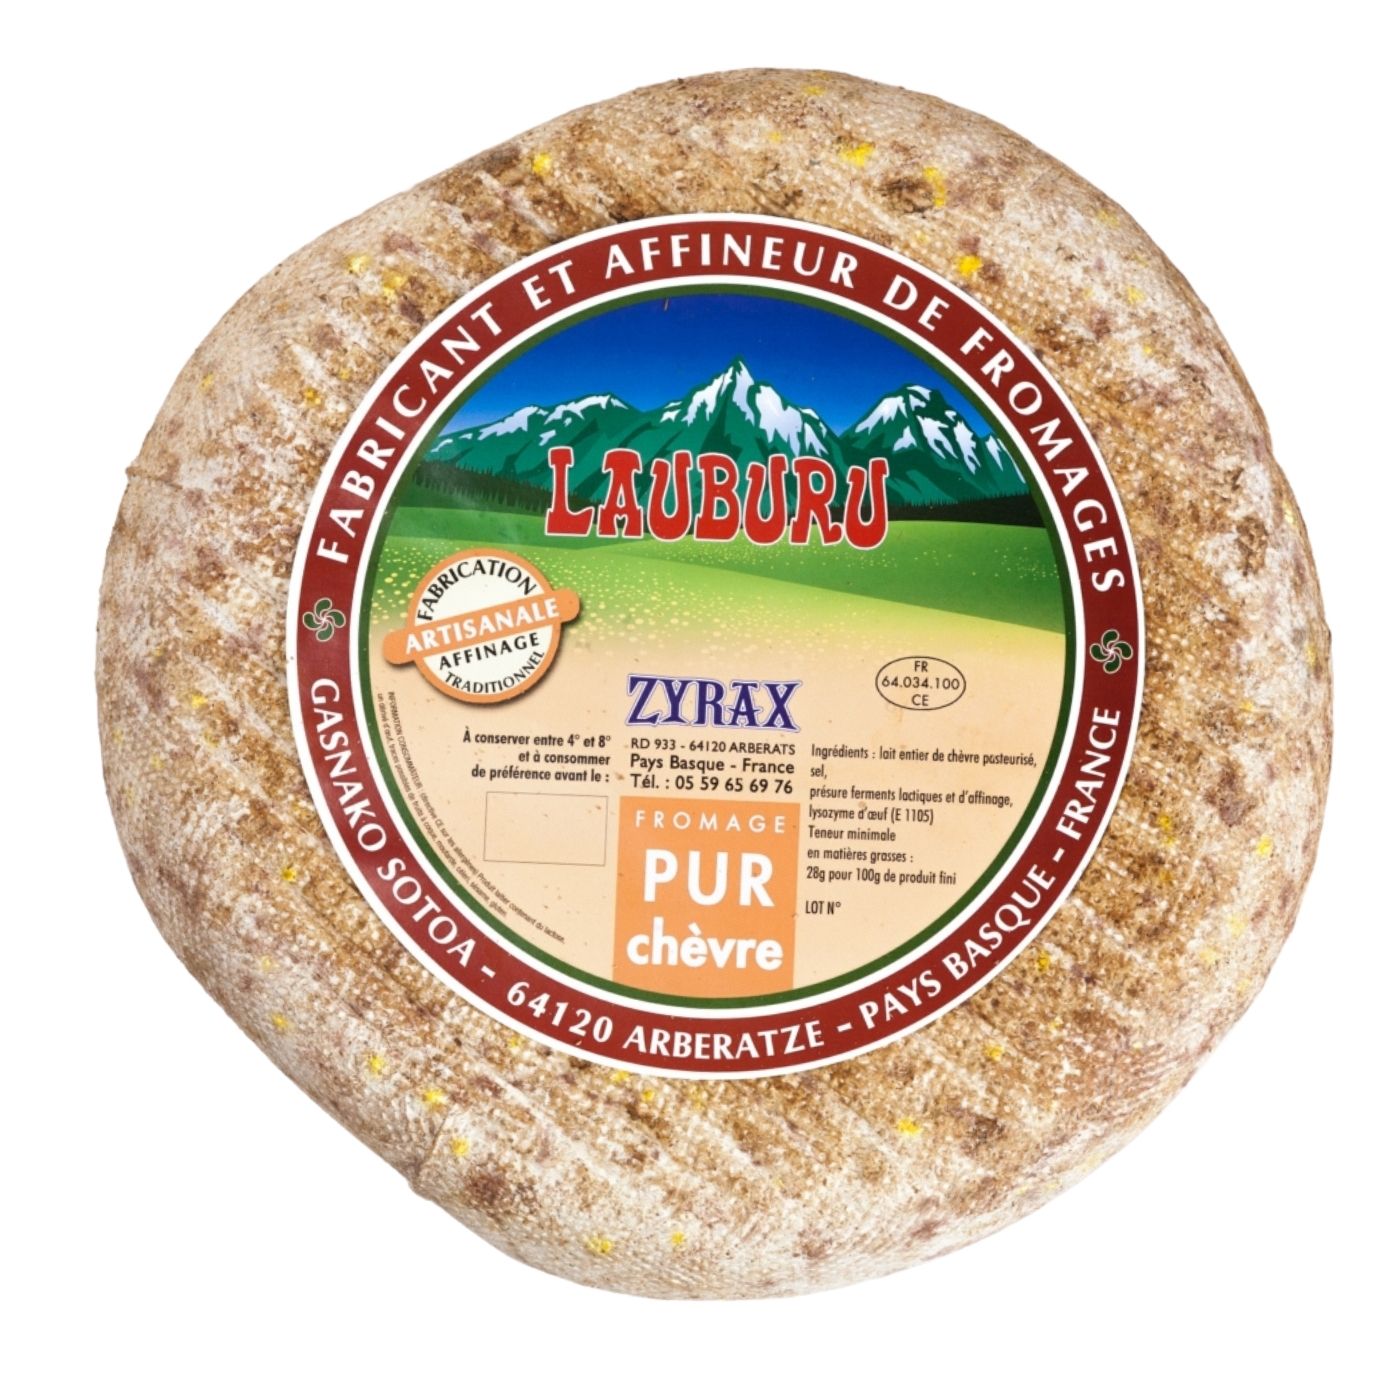 Pur chèvre-zyrax fromage-www.luxfood-shop.fr